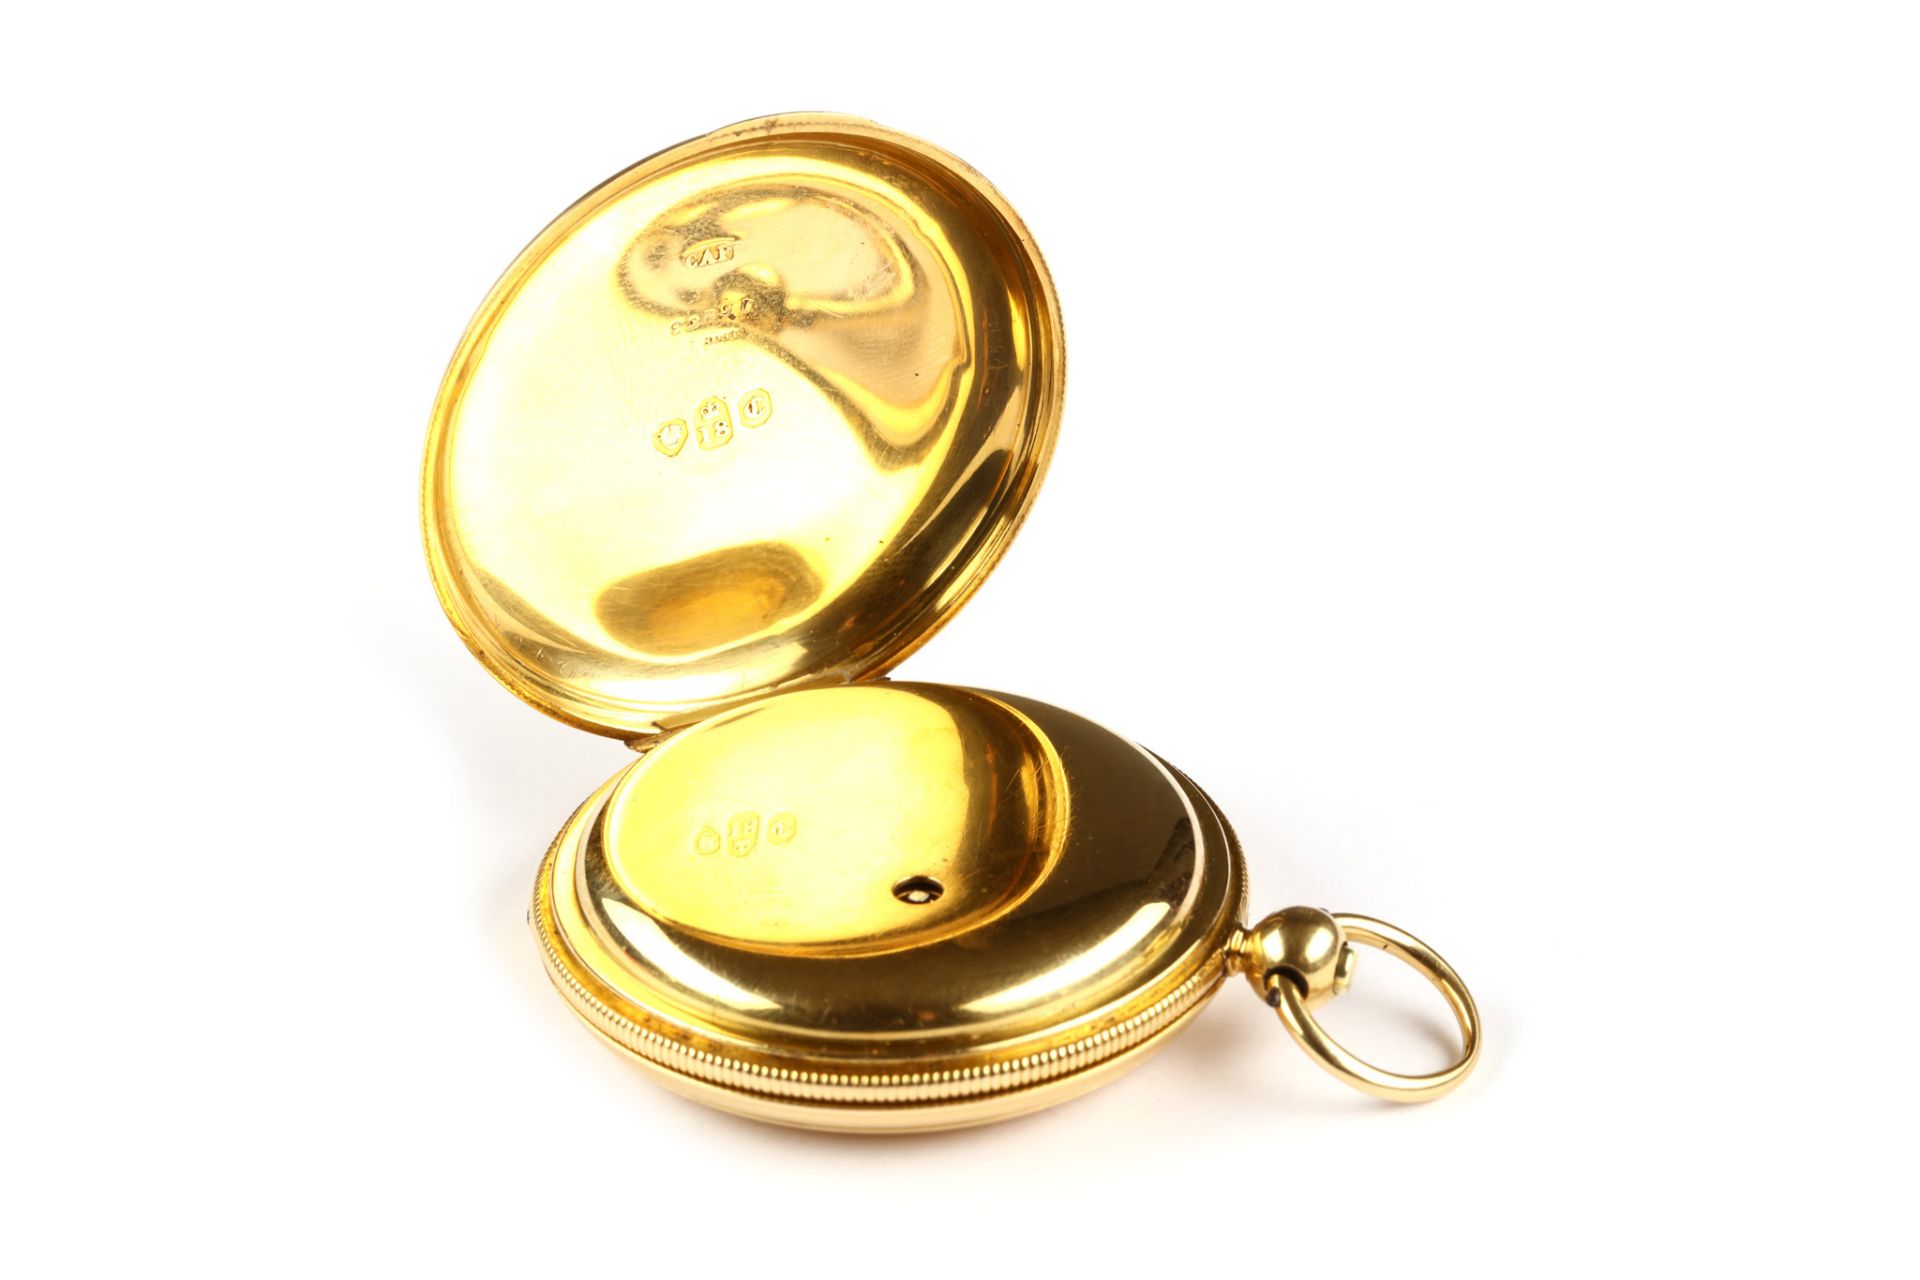 James McCabe. An 18K gold full hunter pocket watch. Case reference: '15263' and stamped 'IMC' (for - Image 3 of 3